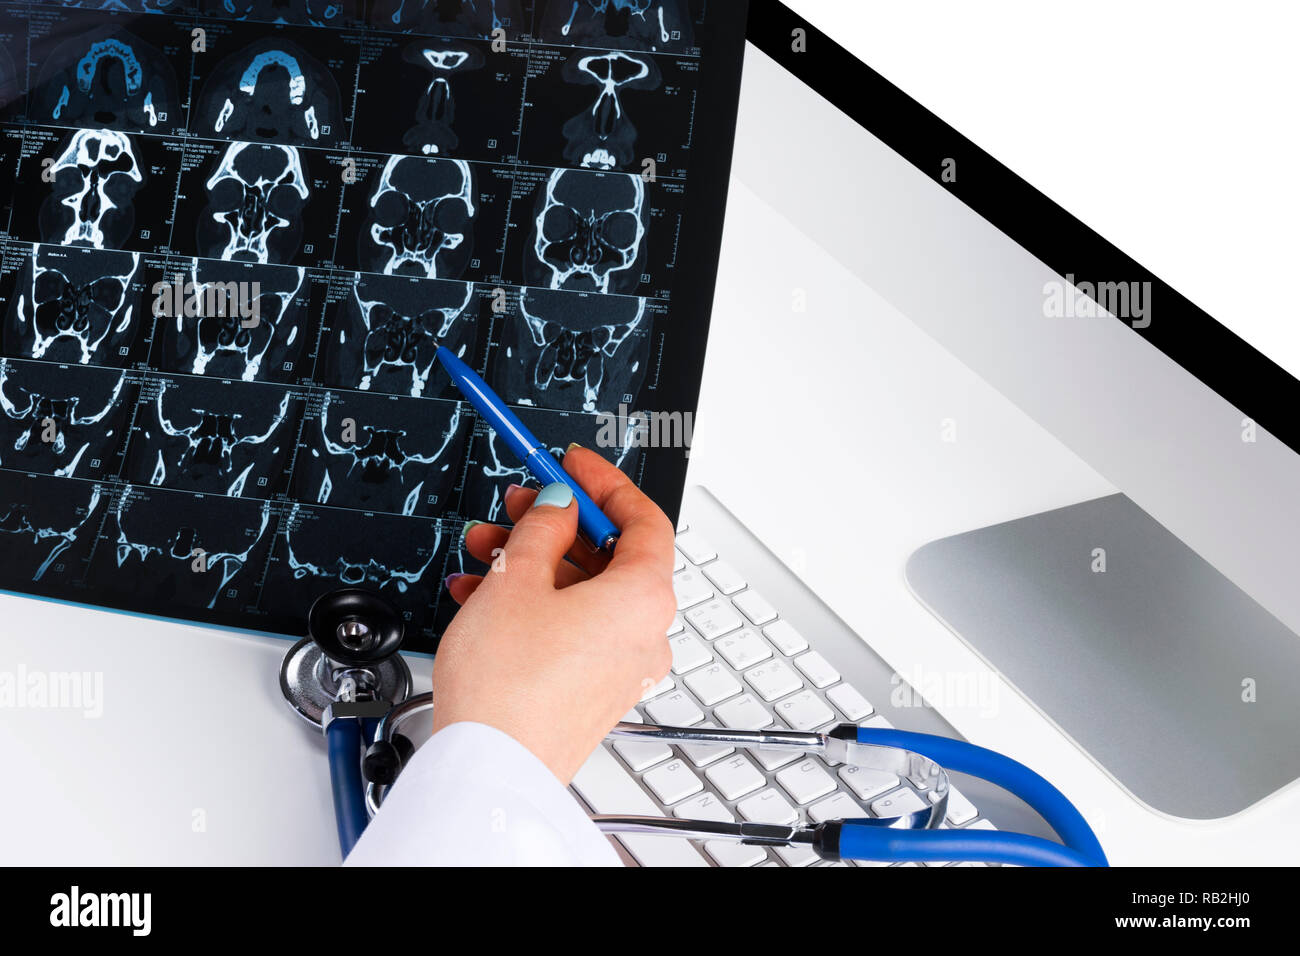 Doctor looking at computer tomography x-ray image, medicine doctor's working table with computer and stethoscope. Healthcare concept Stock Photo